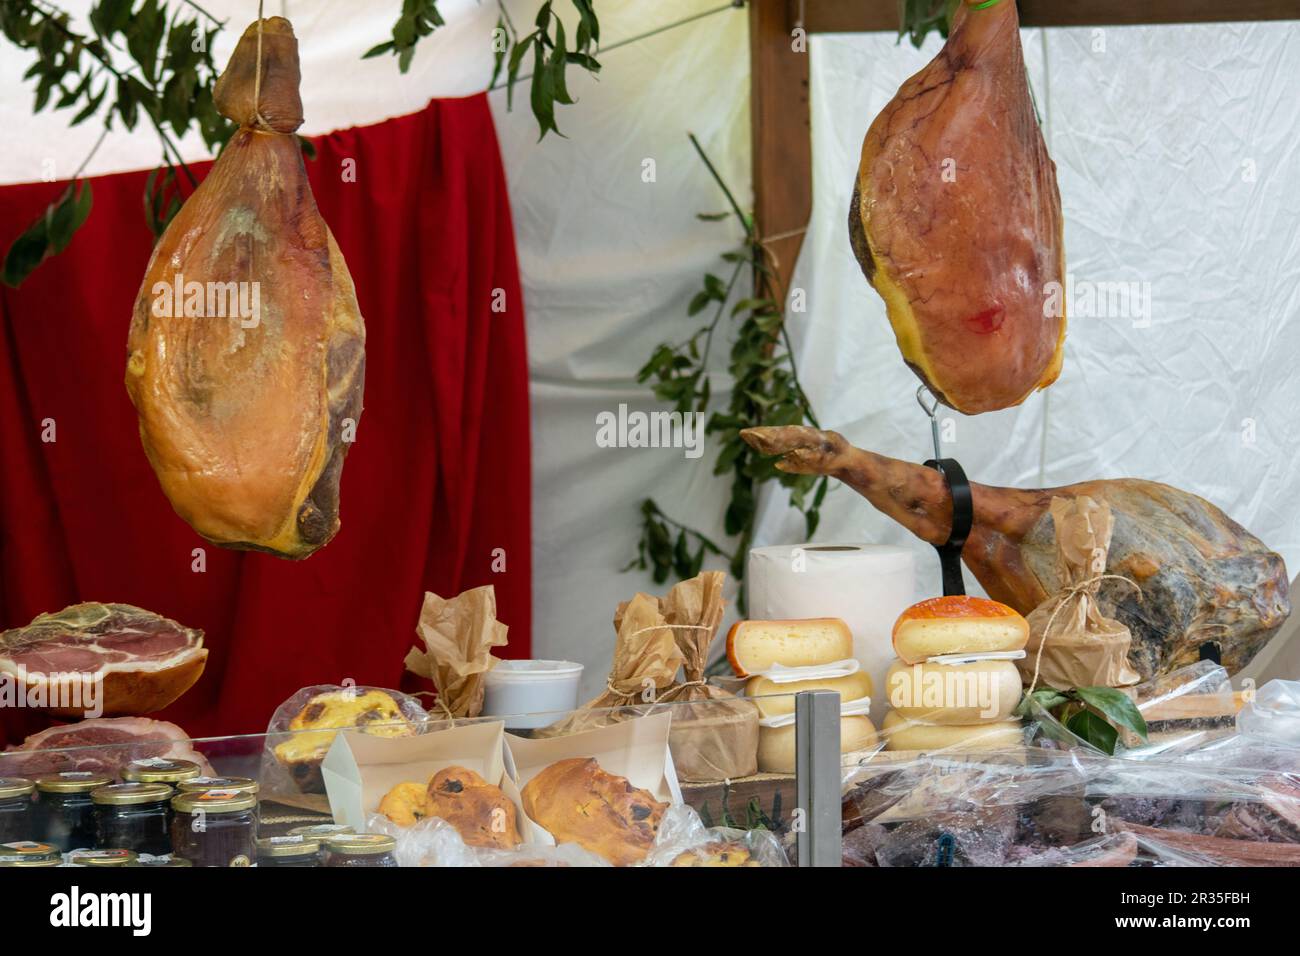 Ham and cheeses displayed on a bench Stock Photo